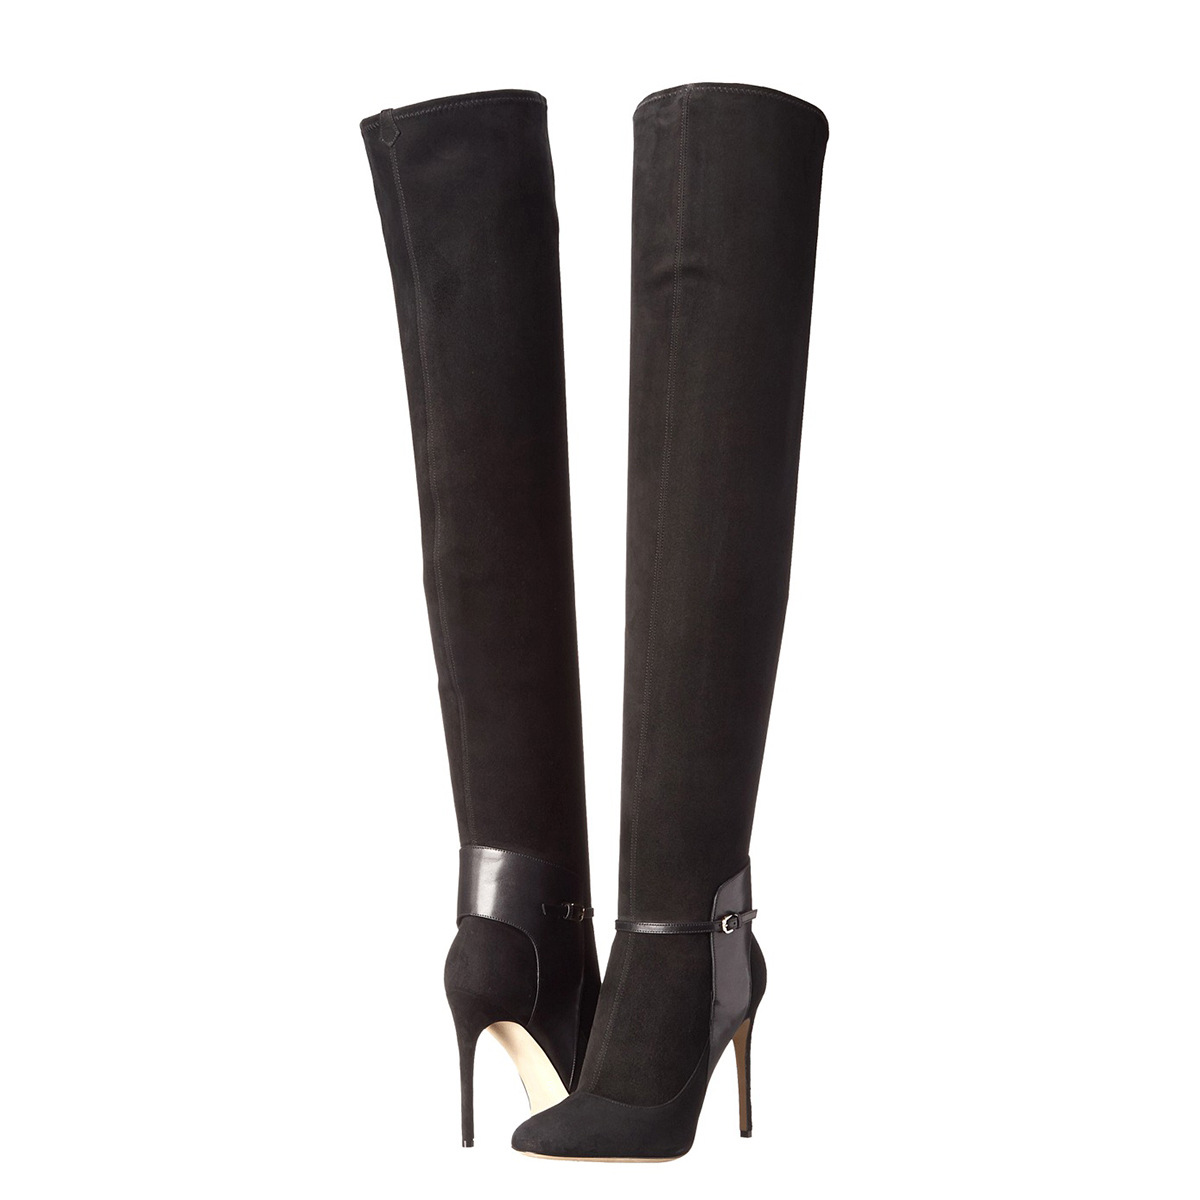 Patchwork Stiletto High Heel Pointed Toe Zipper Over The Knee Long Boots